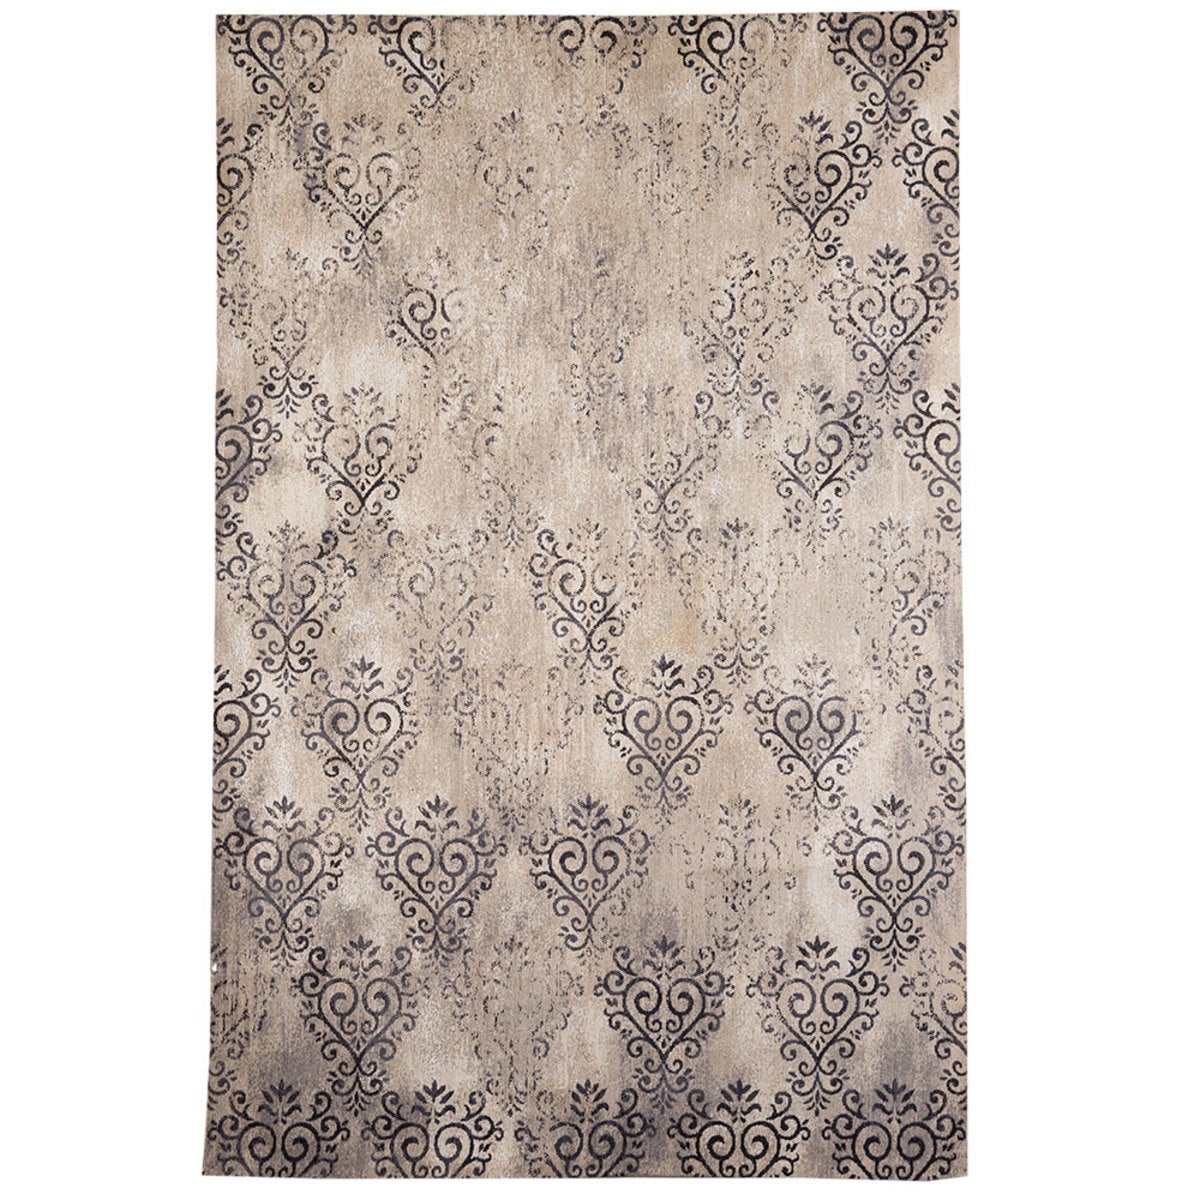 Antibes Recycled Cotton Rug, 4' x 6'